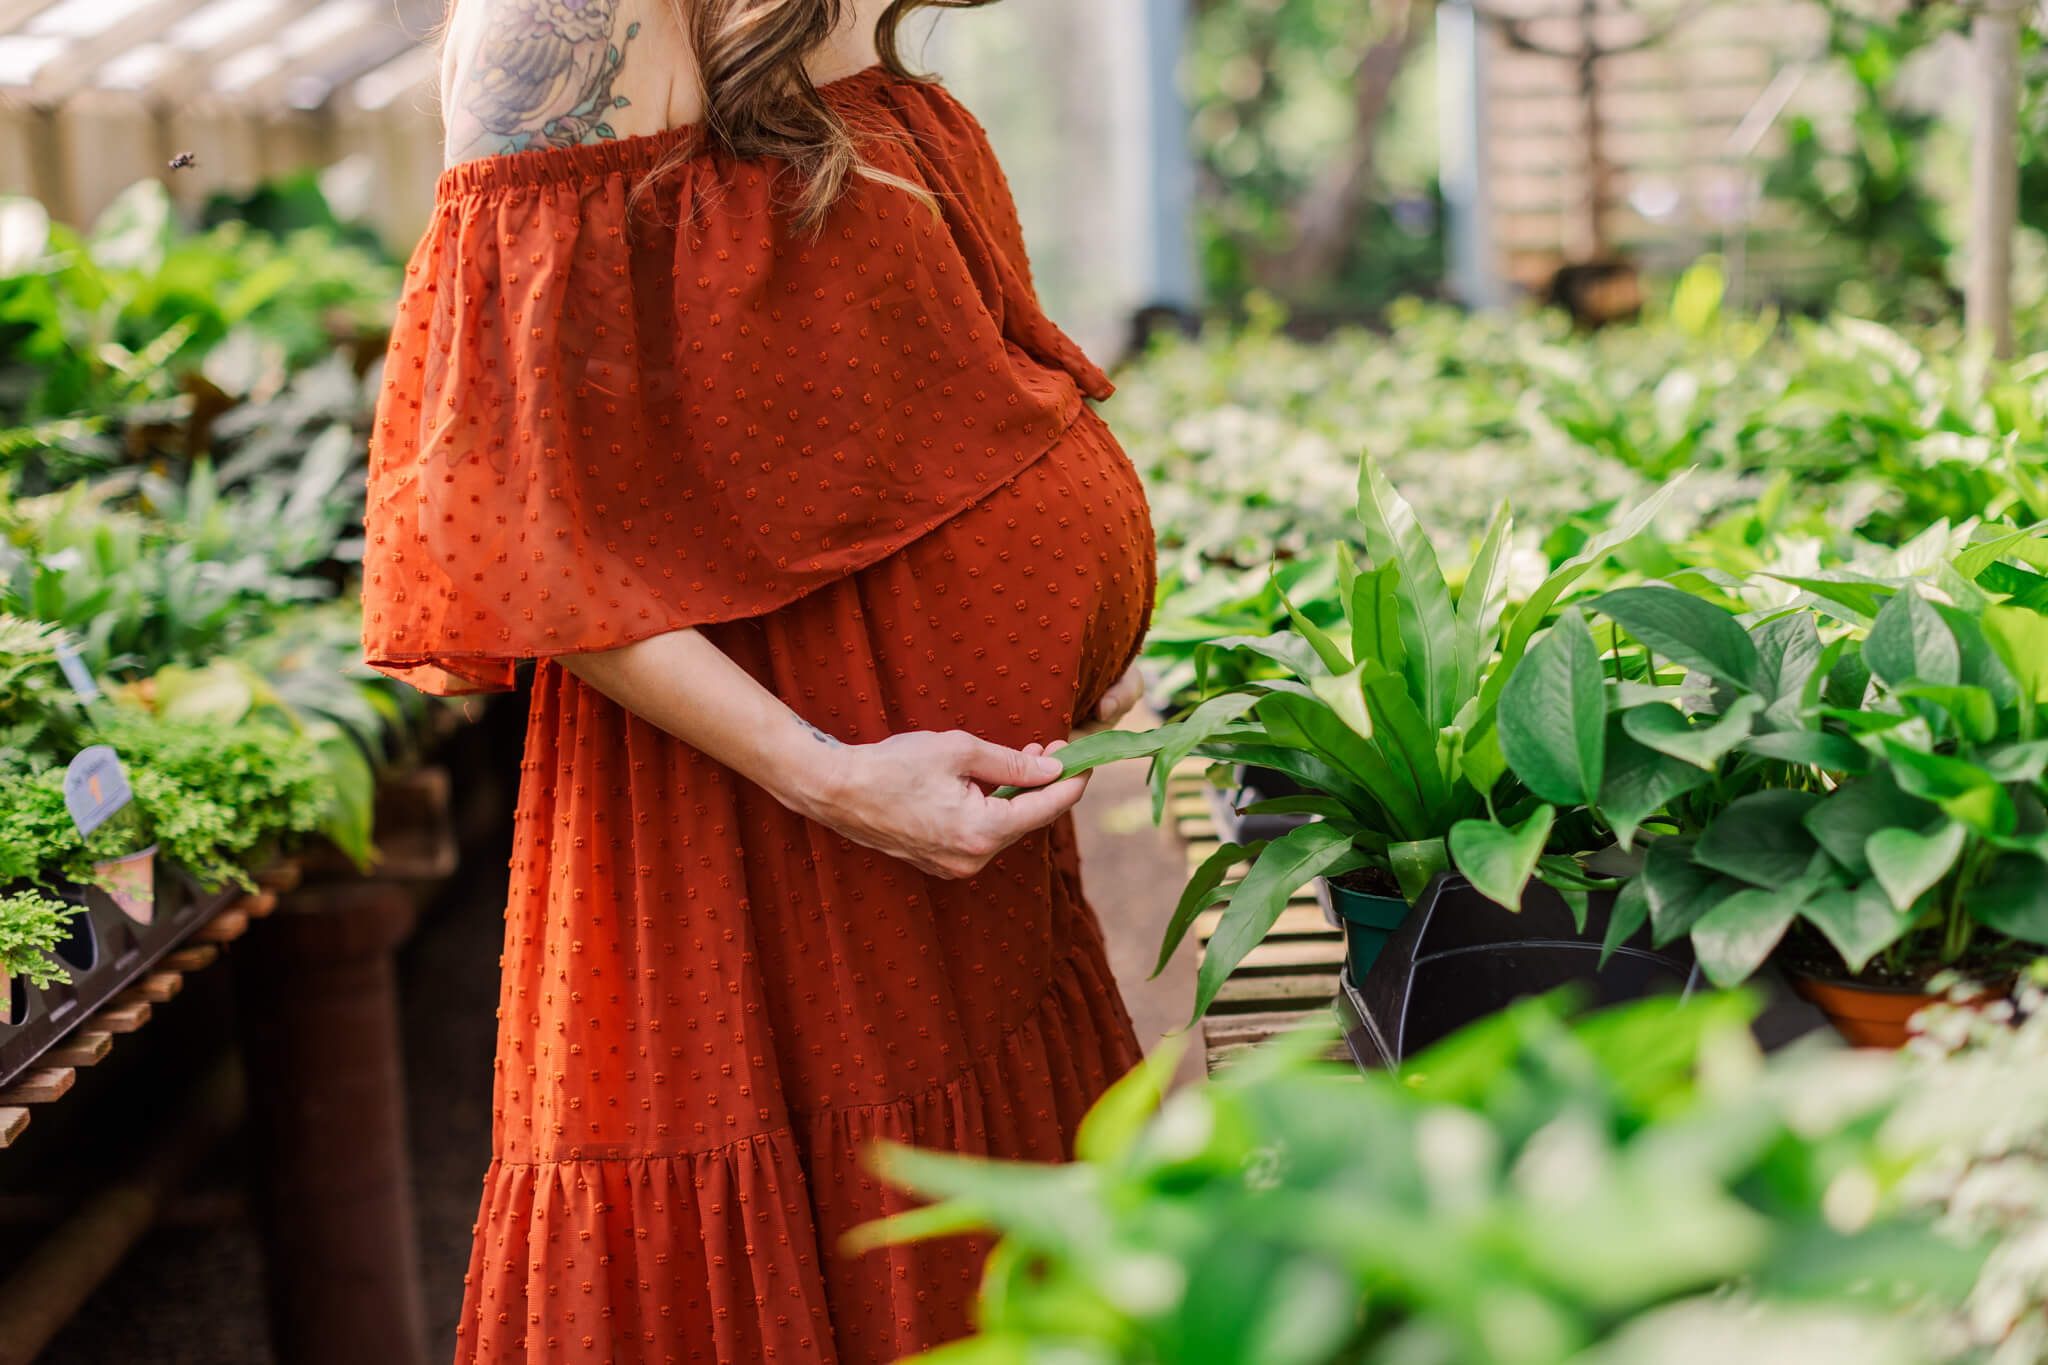 Expecting mom capturing her maternity session at a local greenhouse. Client is wearing a burnt orange baltic born dress. captured by molly berry photography.
obgyn augusta ga